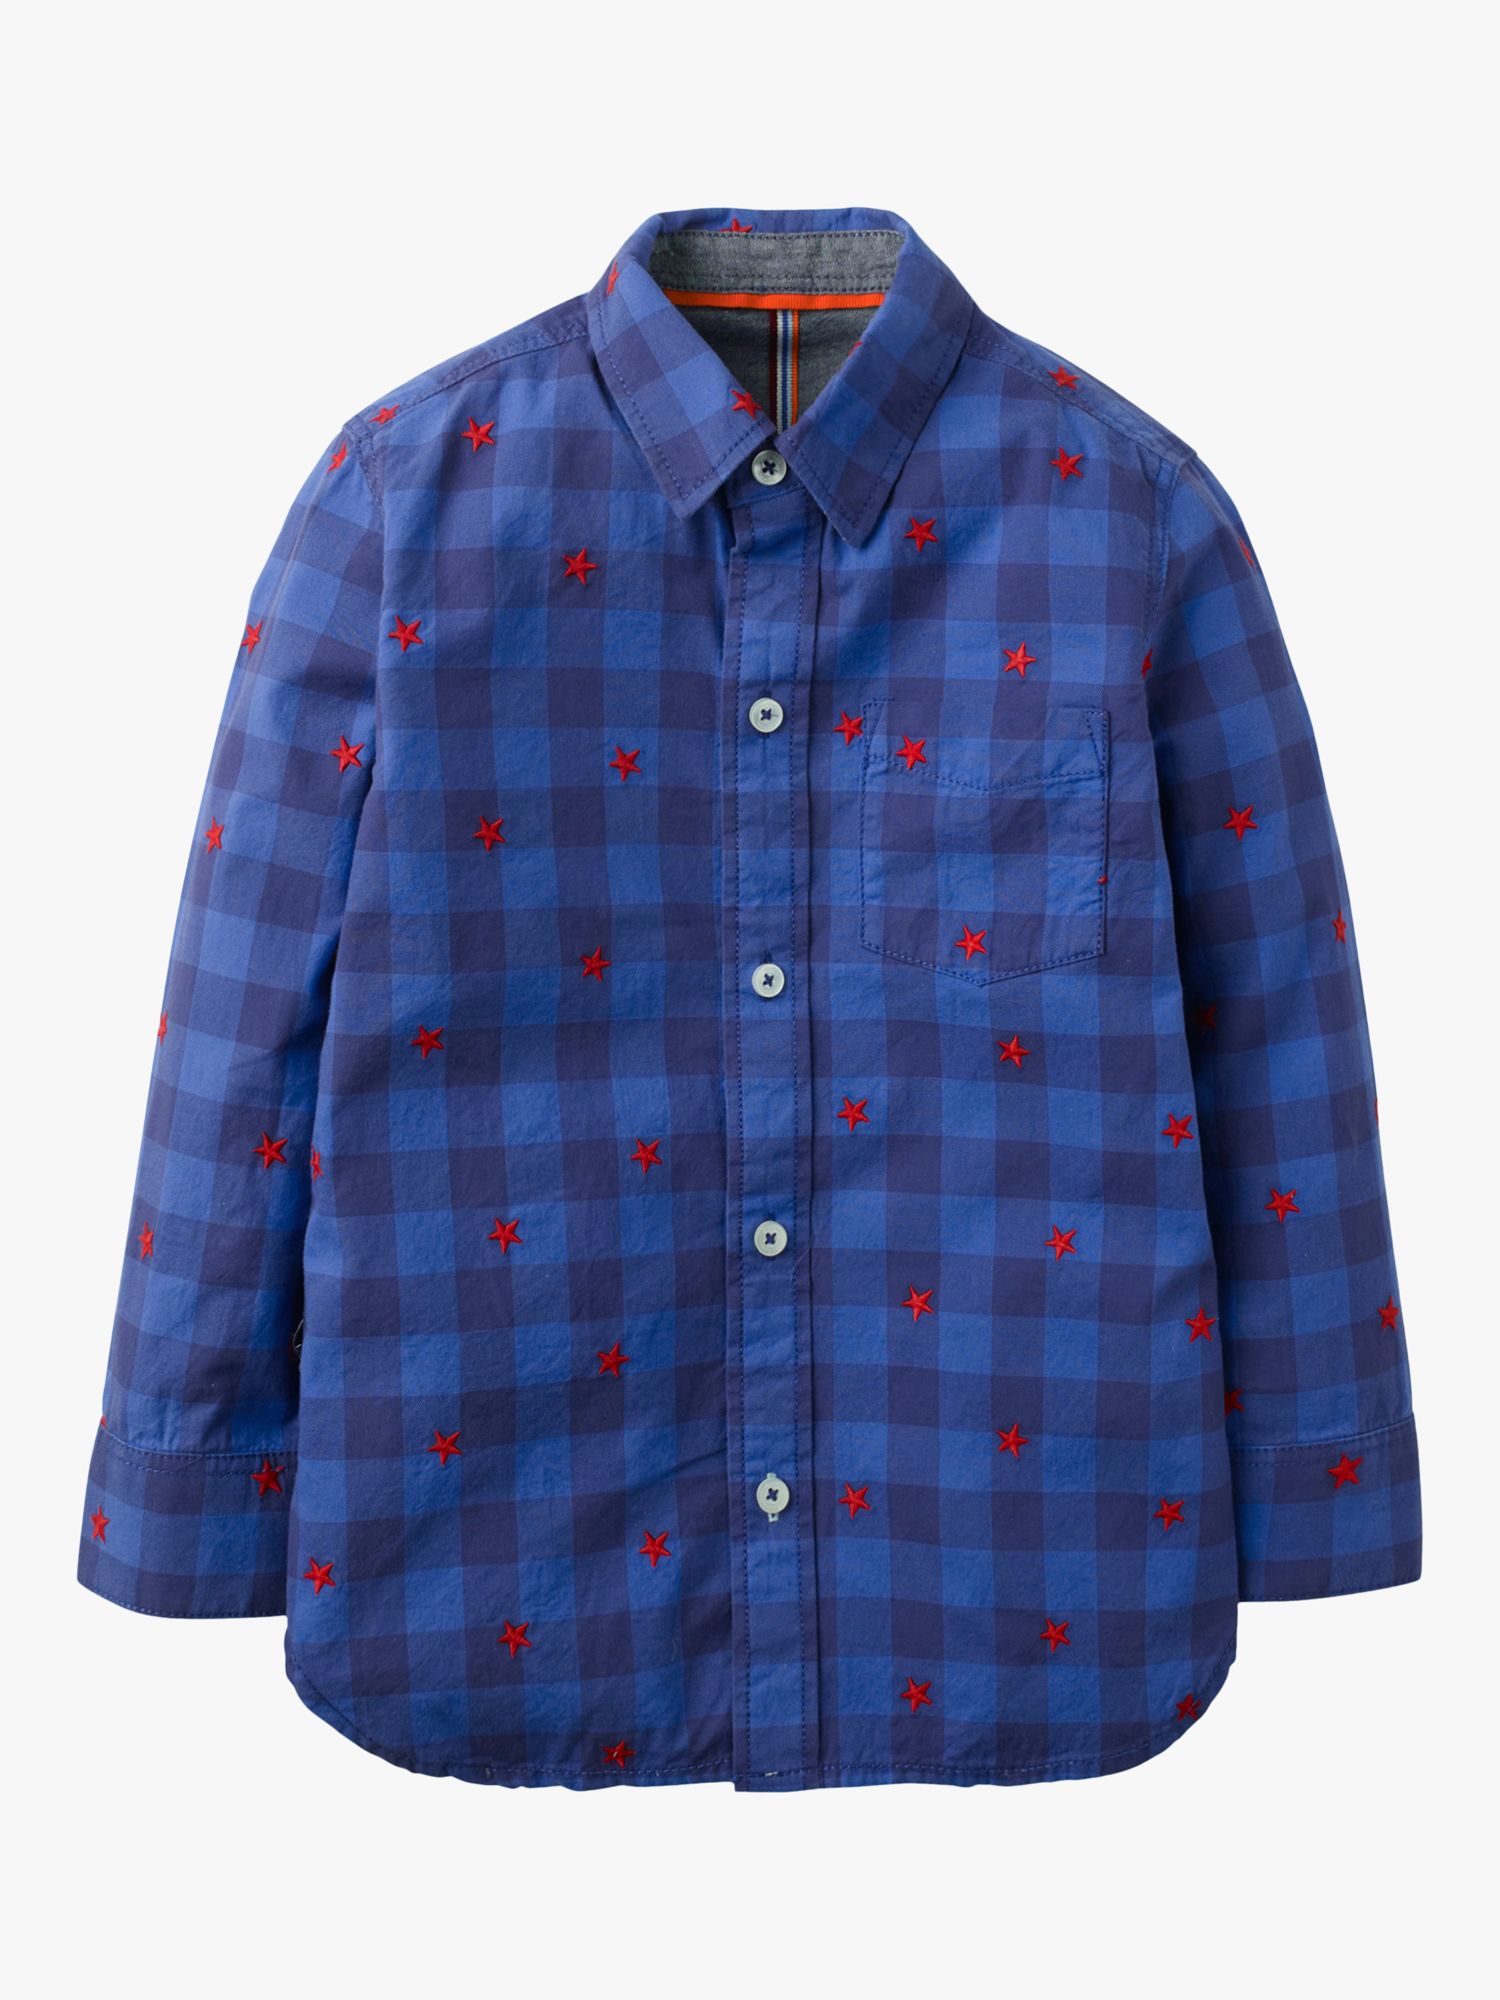 Image of Mini Boden Boys Casual Star Gingham Twill Shirt Navy